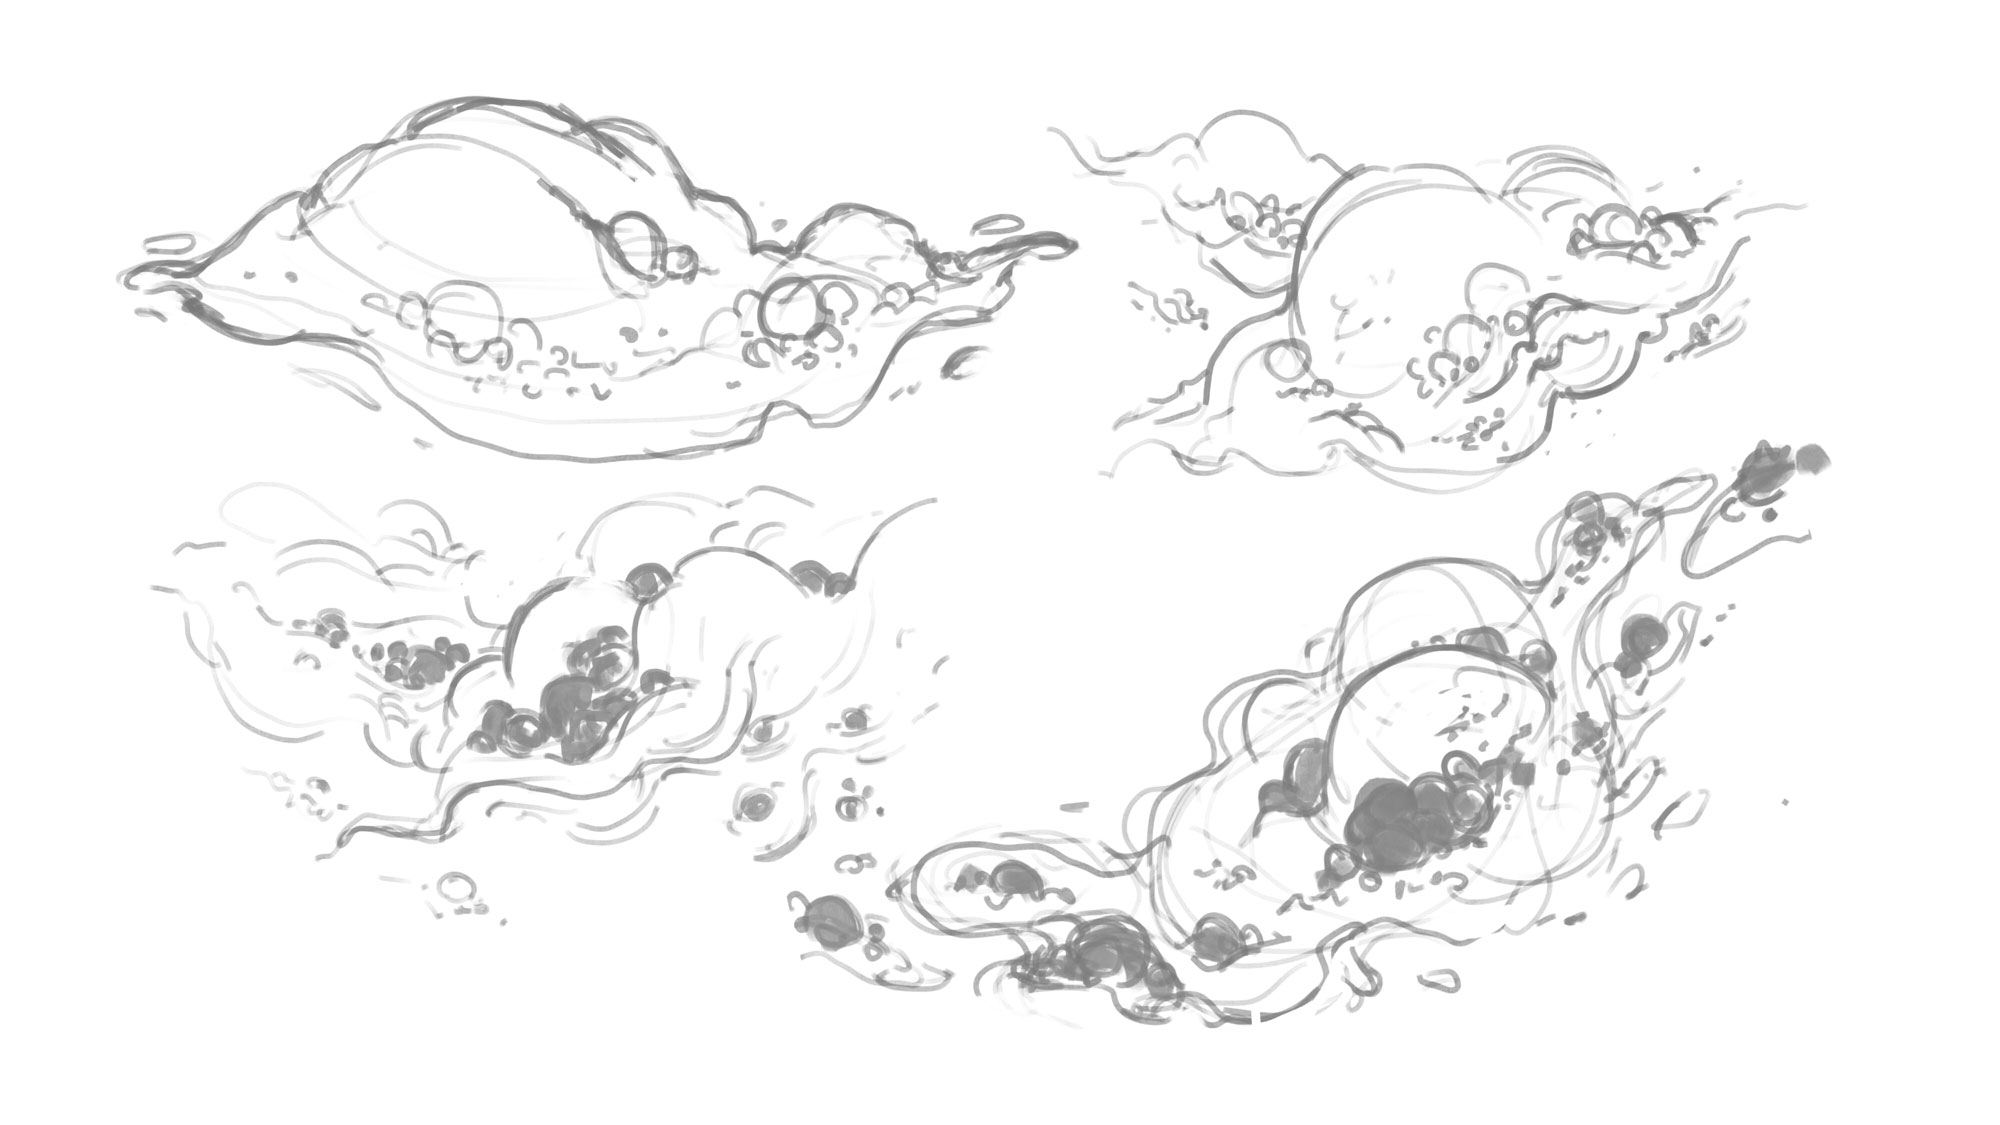 Sketches of black holes cradled in the crevices of iridescent, cloud-like forms.